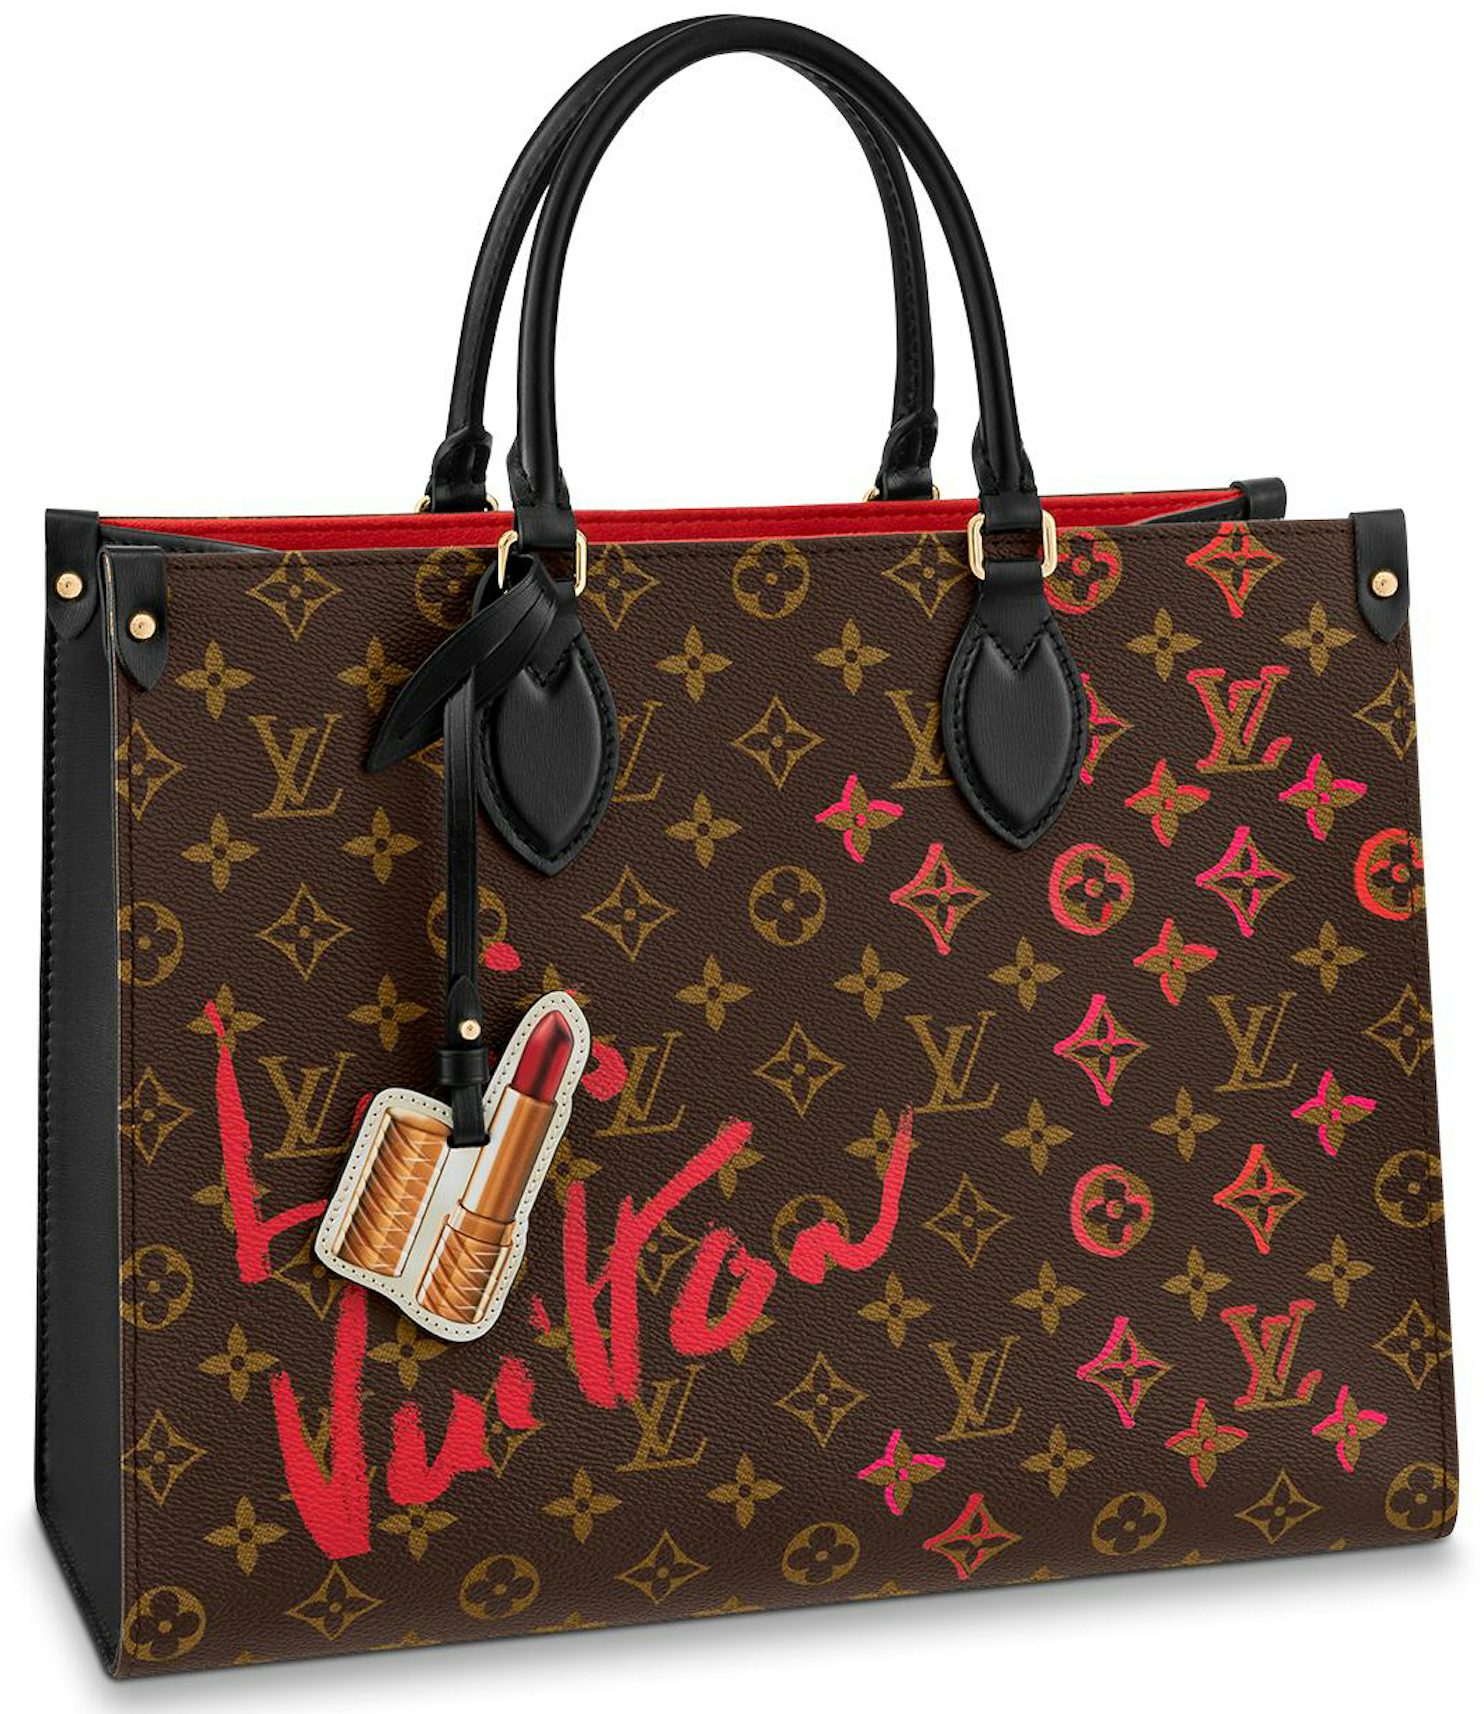 Louis Vuitton Set of Two: Limited Edition Pink & Red Giant